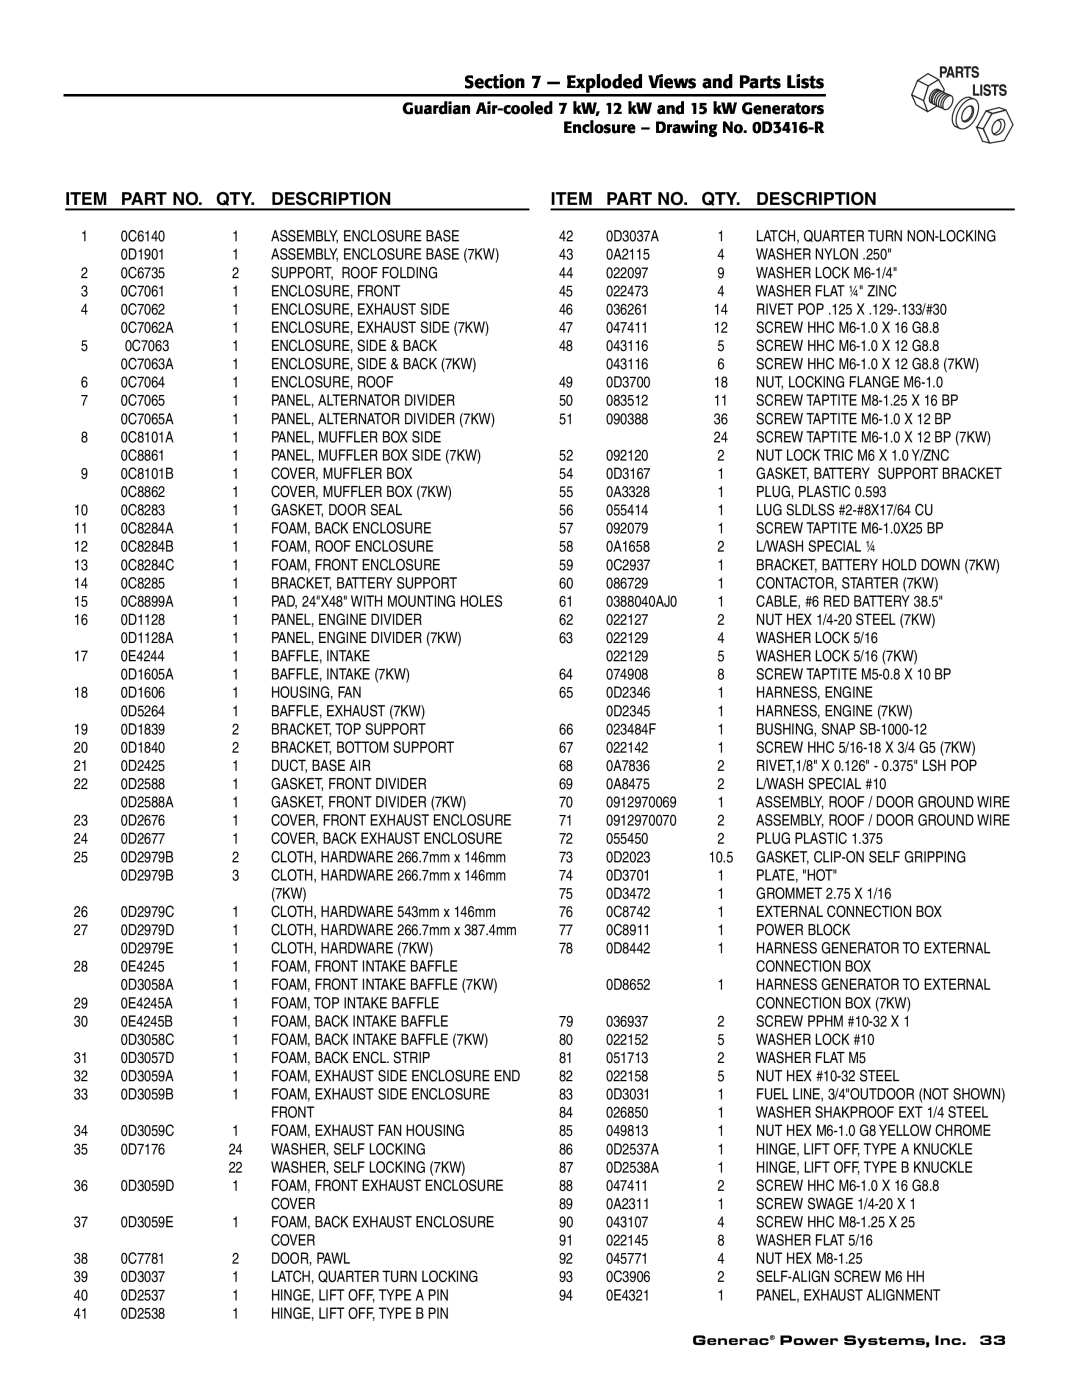 Guardian Technologies 04390-2, 04389-2, 04456-2 owner manual Exploded Views and Parts Lists, Description 